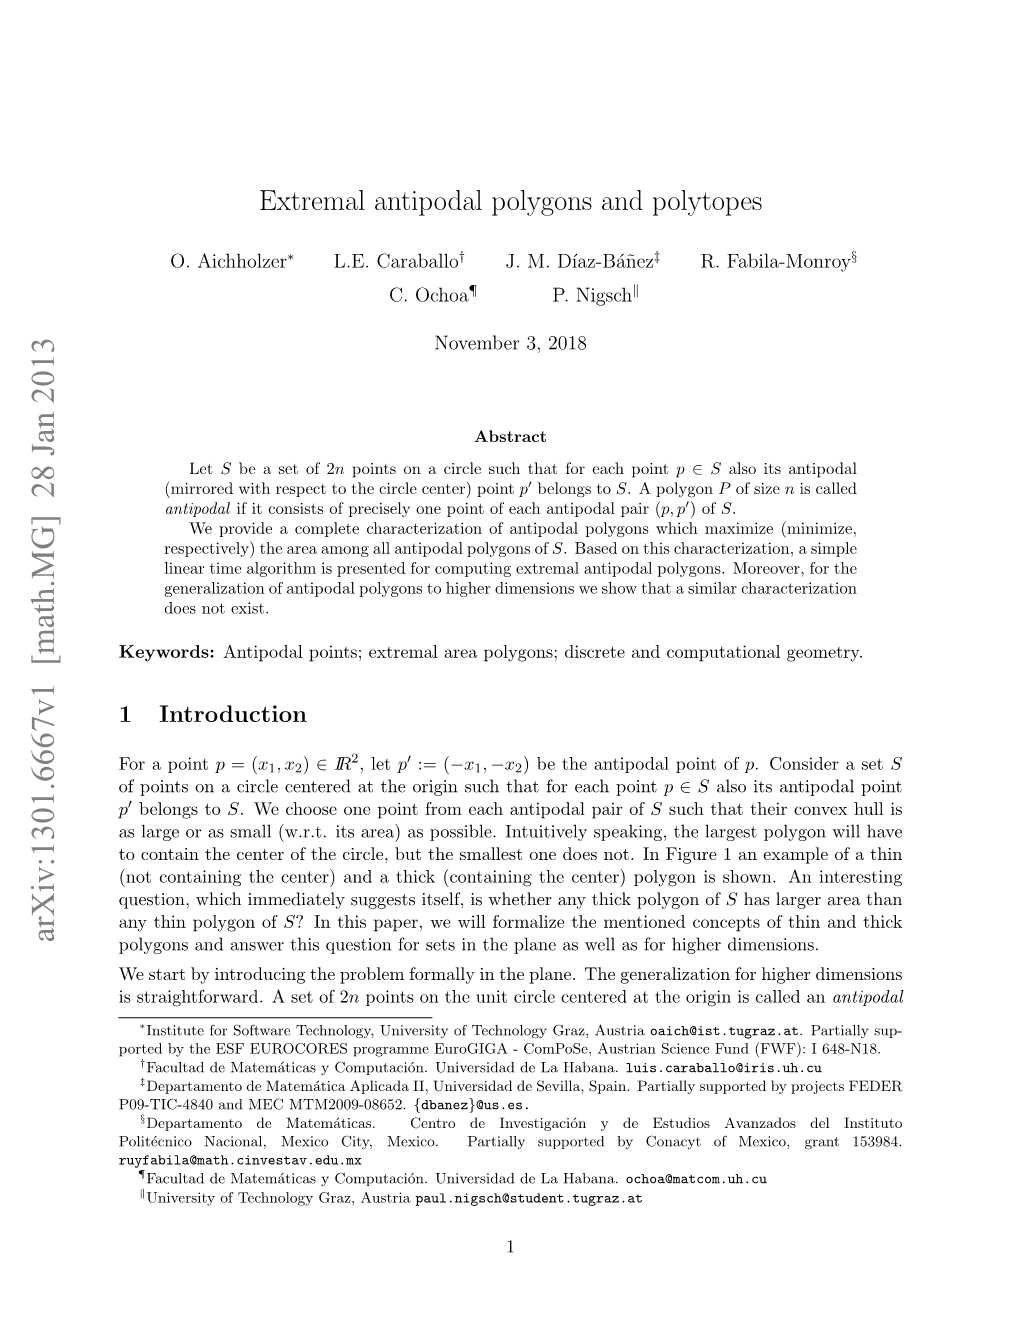 Extremal Antipodal Polygons and Polytopes